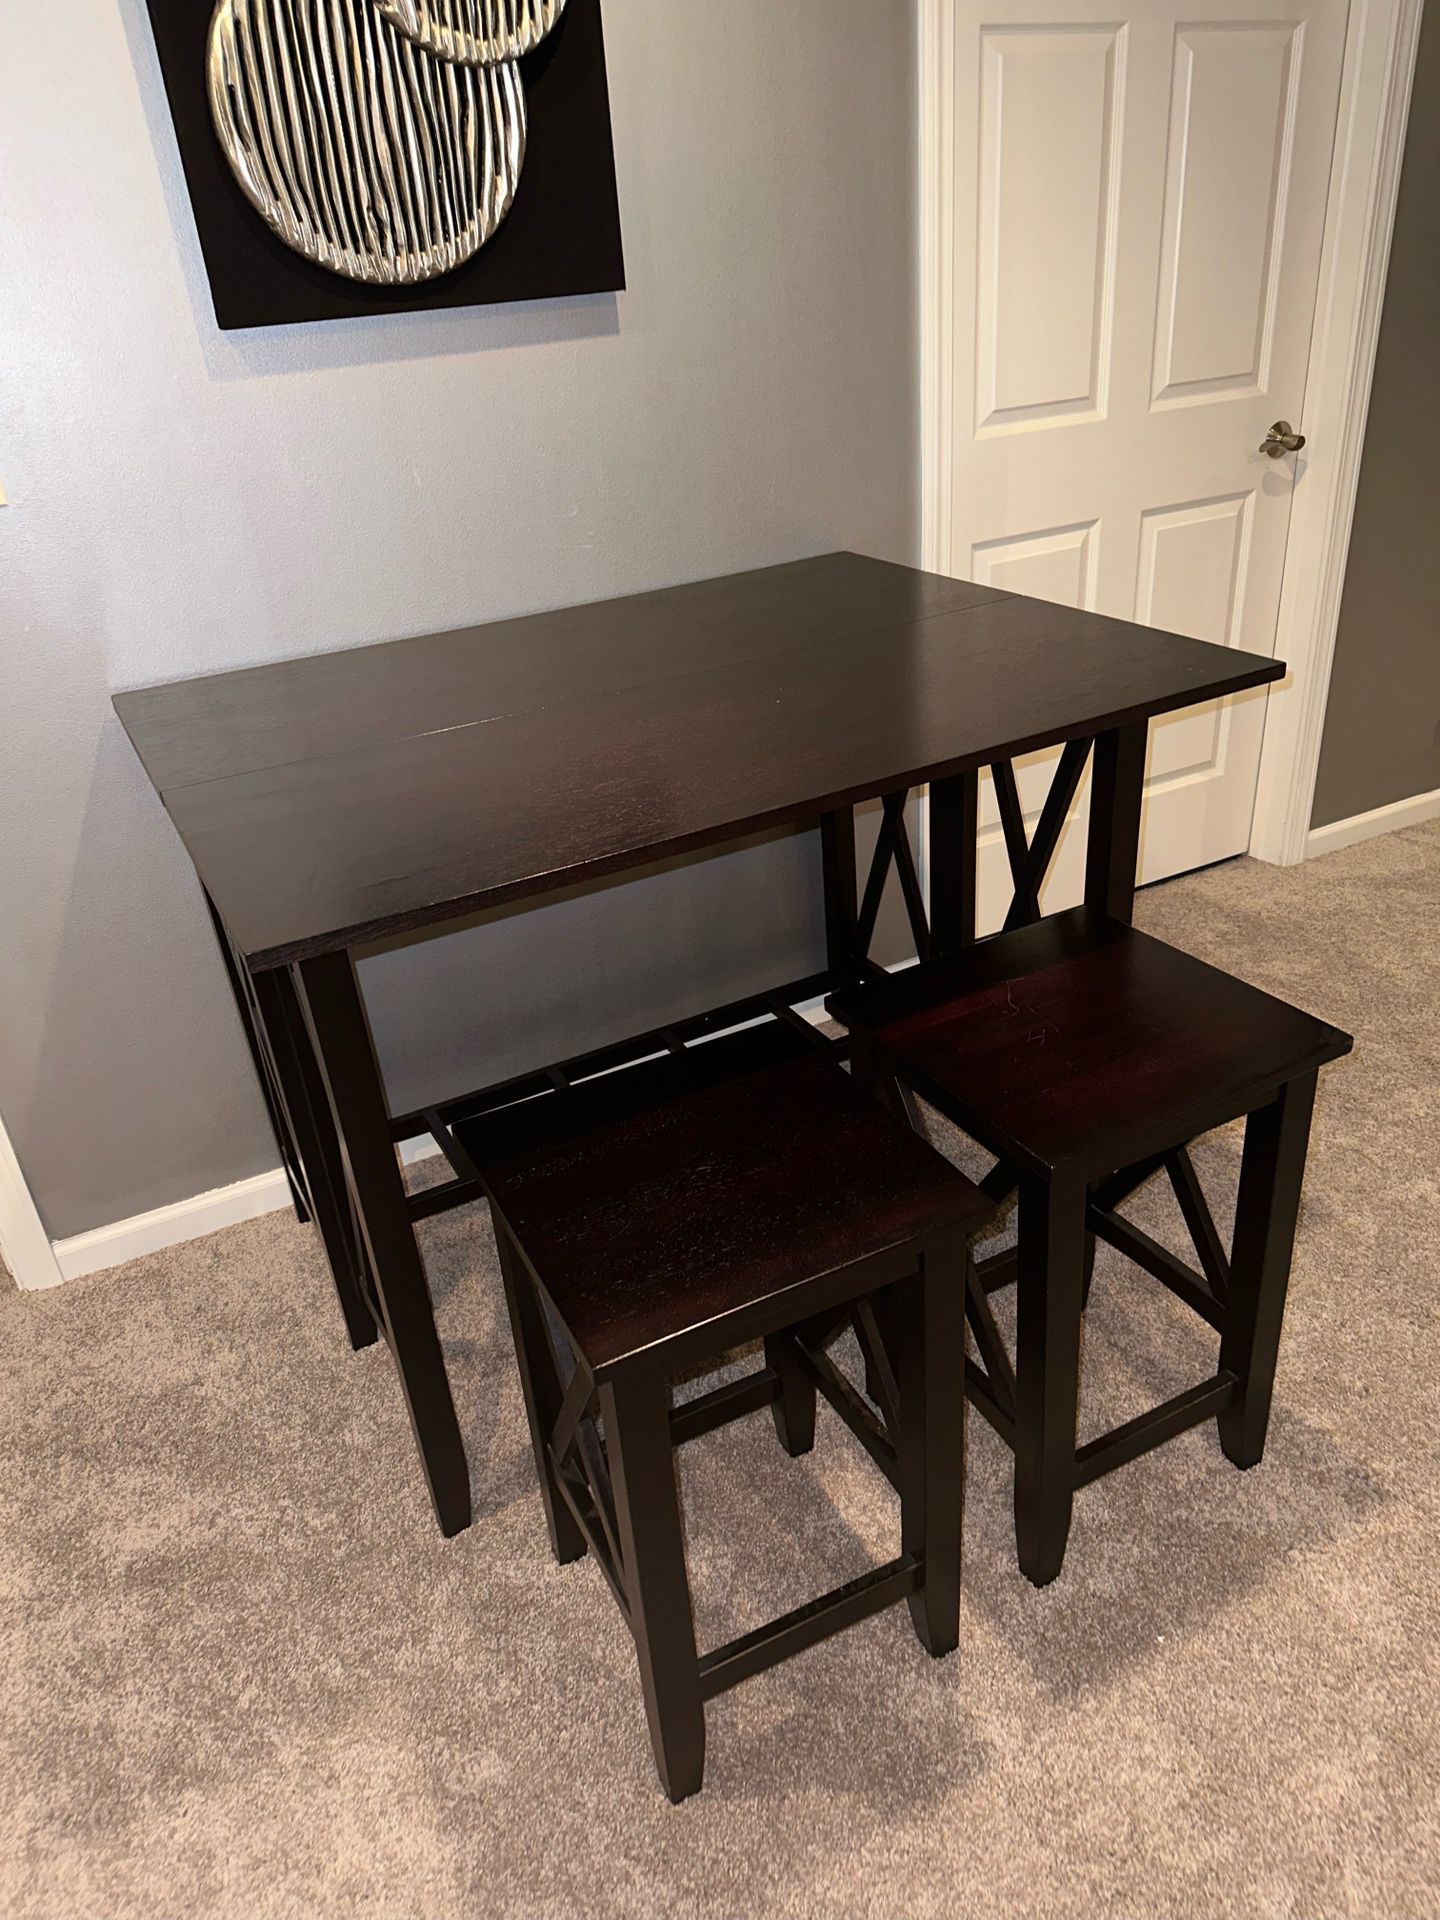 Pier One Kenzie Breakfast Table With Stools